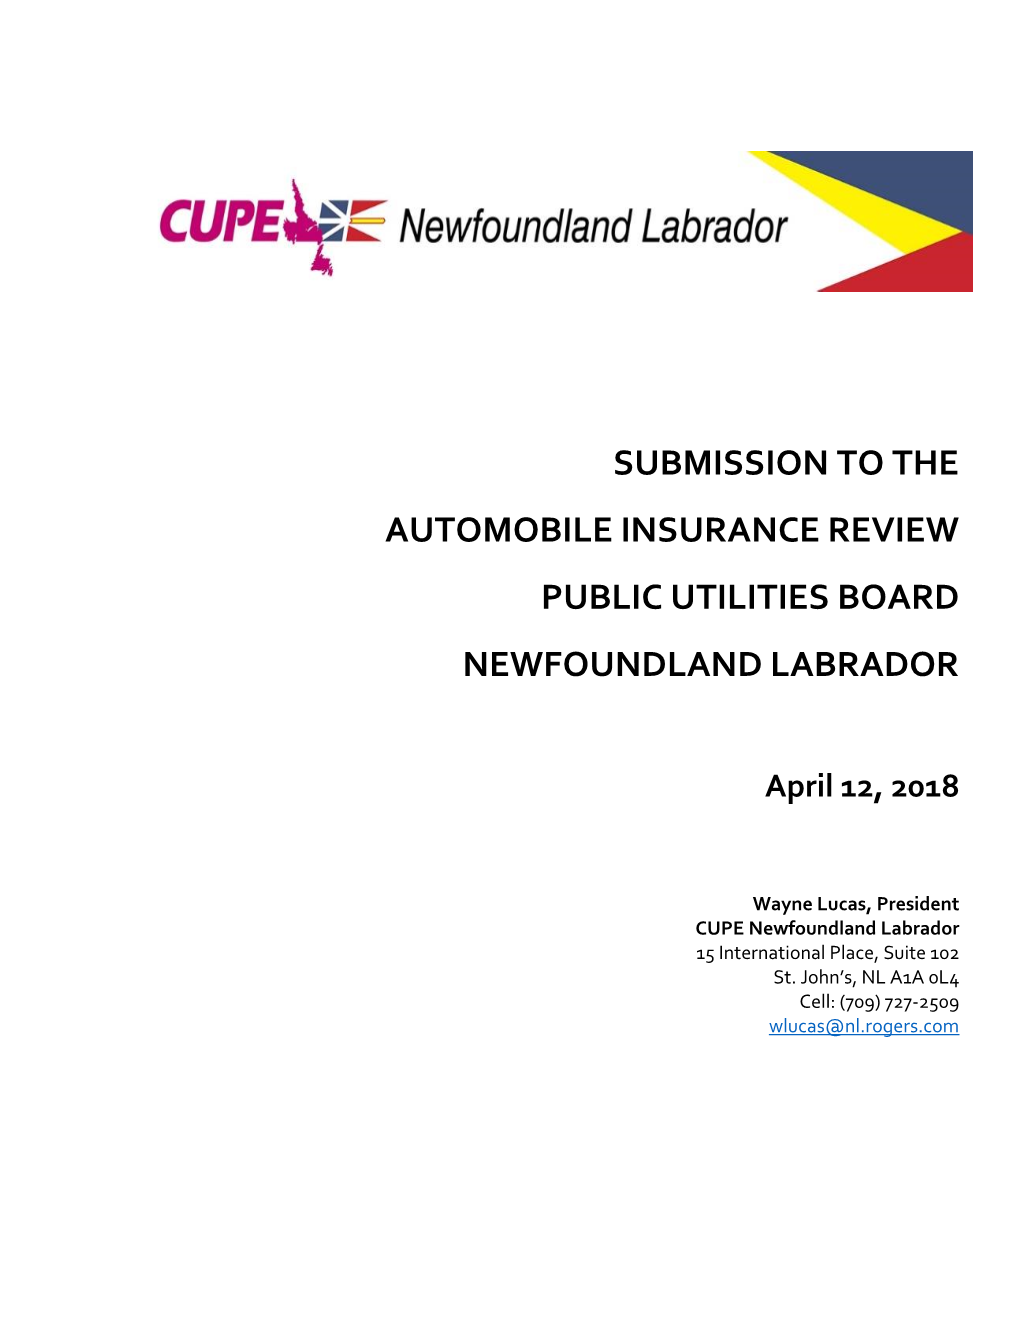 Submission to the Automobile Insurance Review Public Utilities Board Newfoundland Labrador